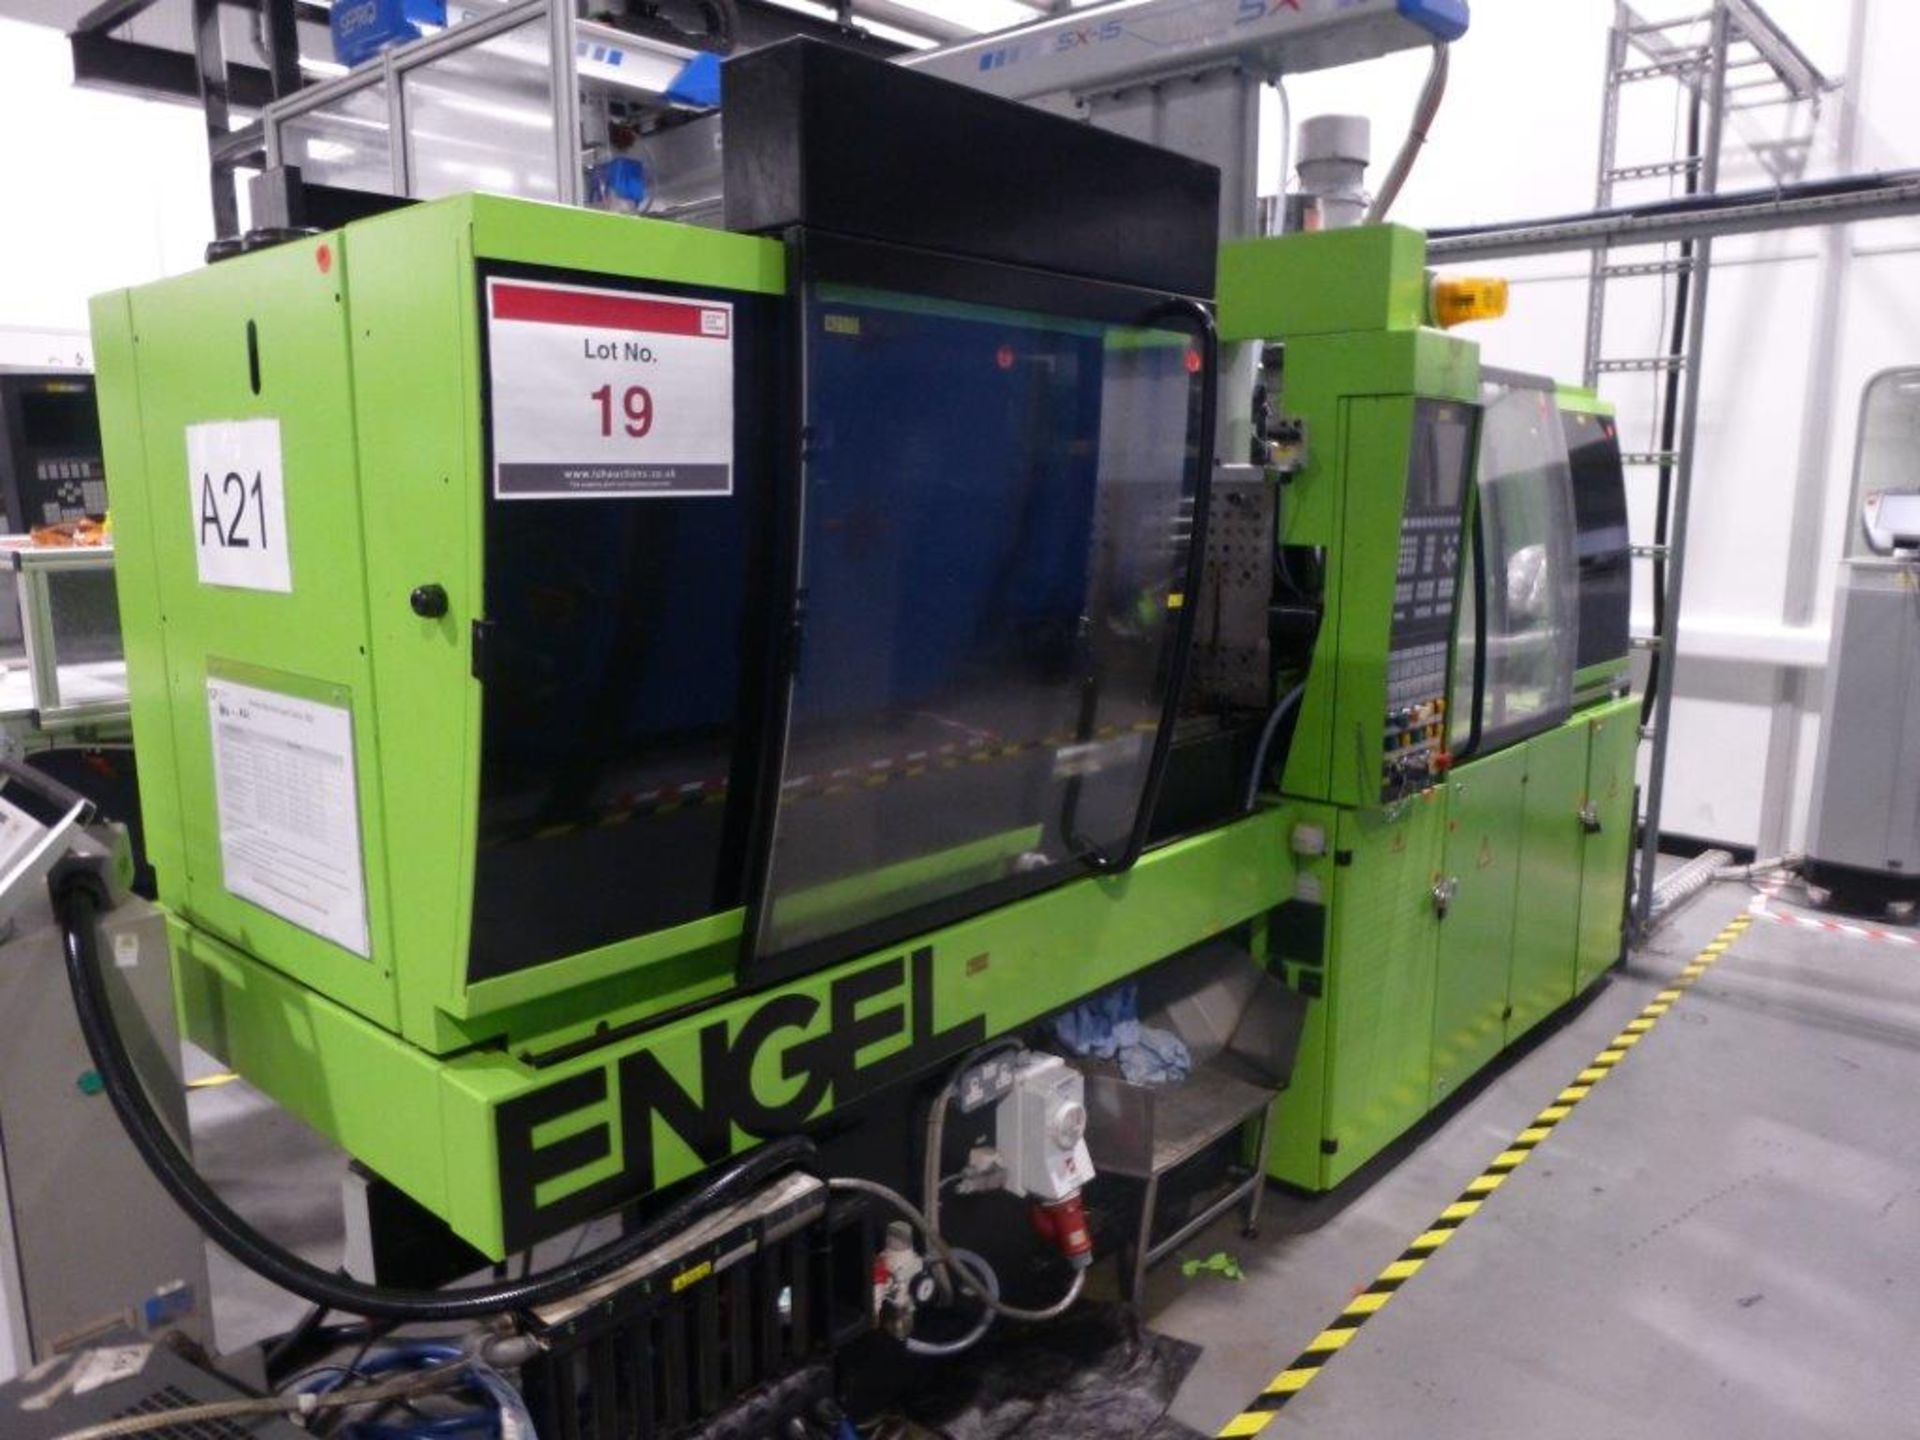 Engel ES200/50HL CNC Plastic Injection Moulding Machine Serial No. 31803 (1997) with DBTB - Image 3 of 7